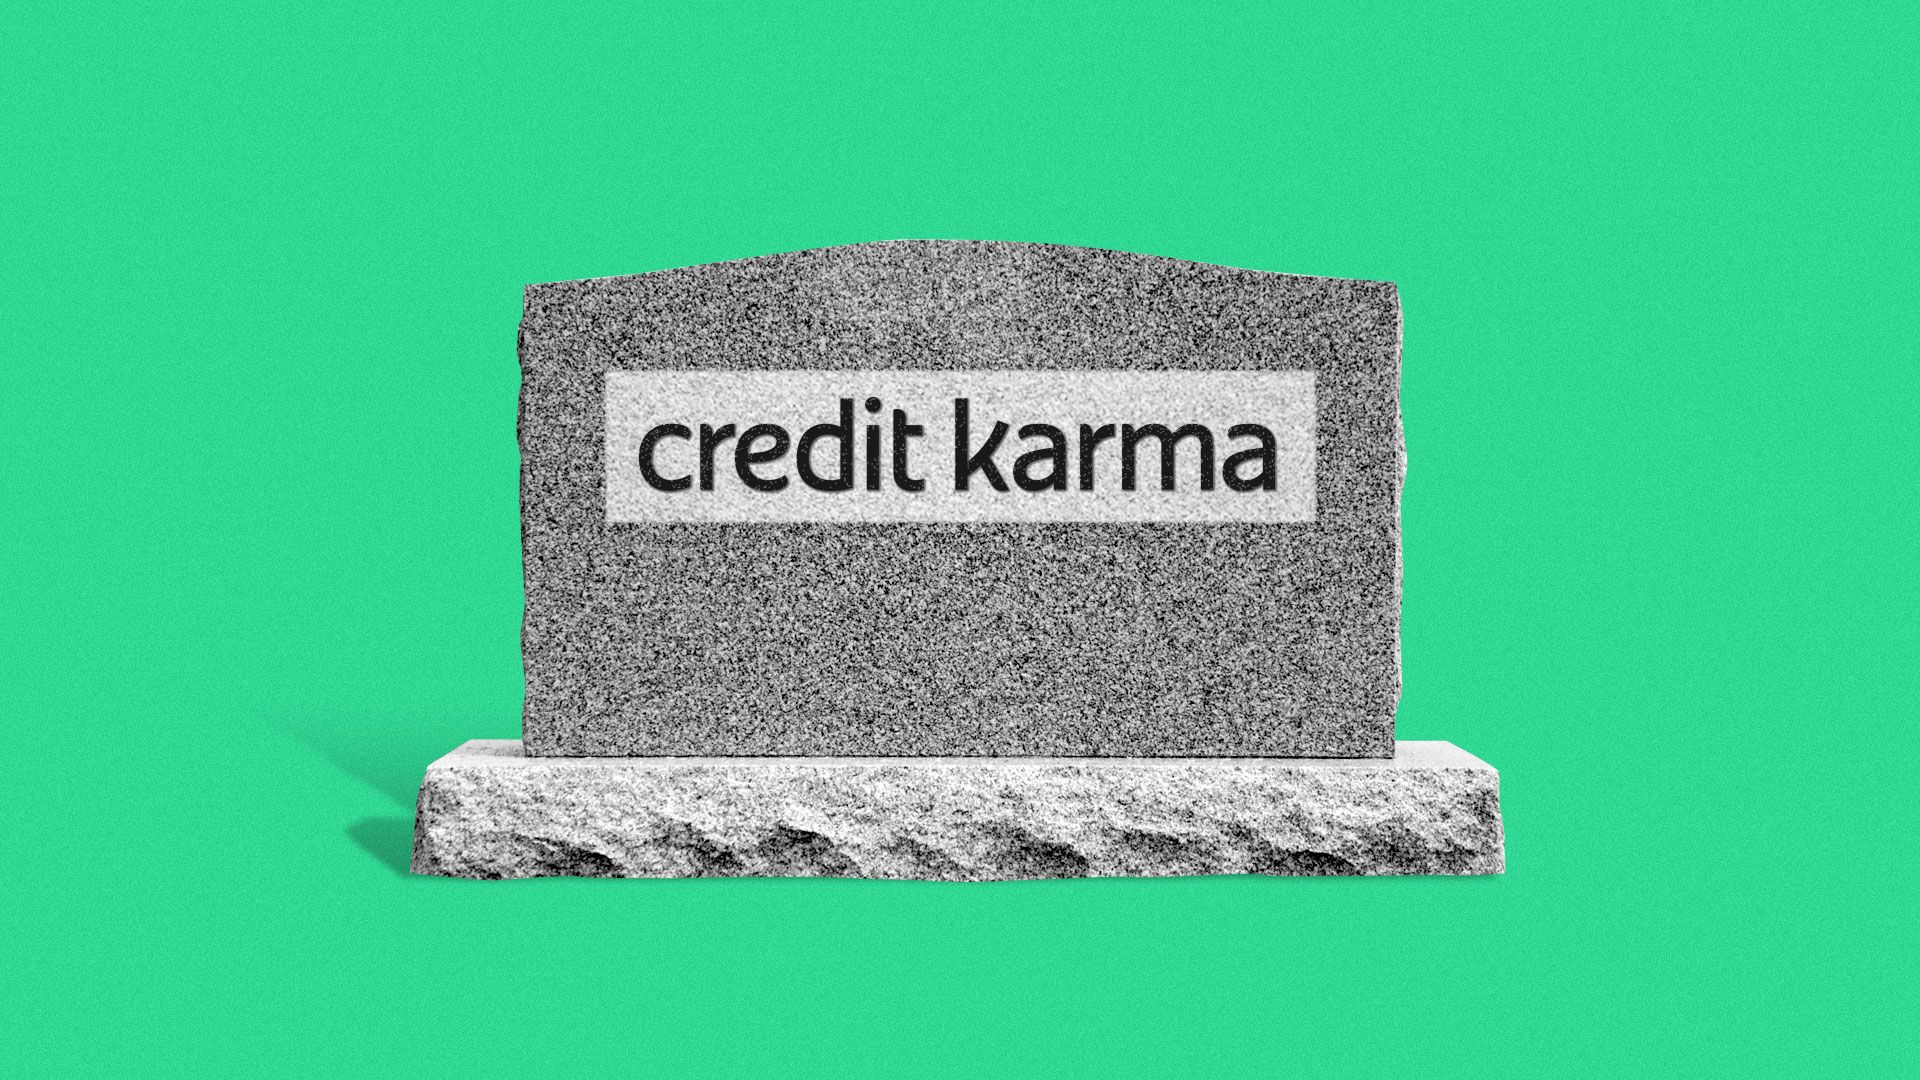 Illustration of a gravestone with the Credit Karma logo.